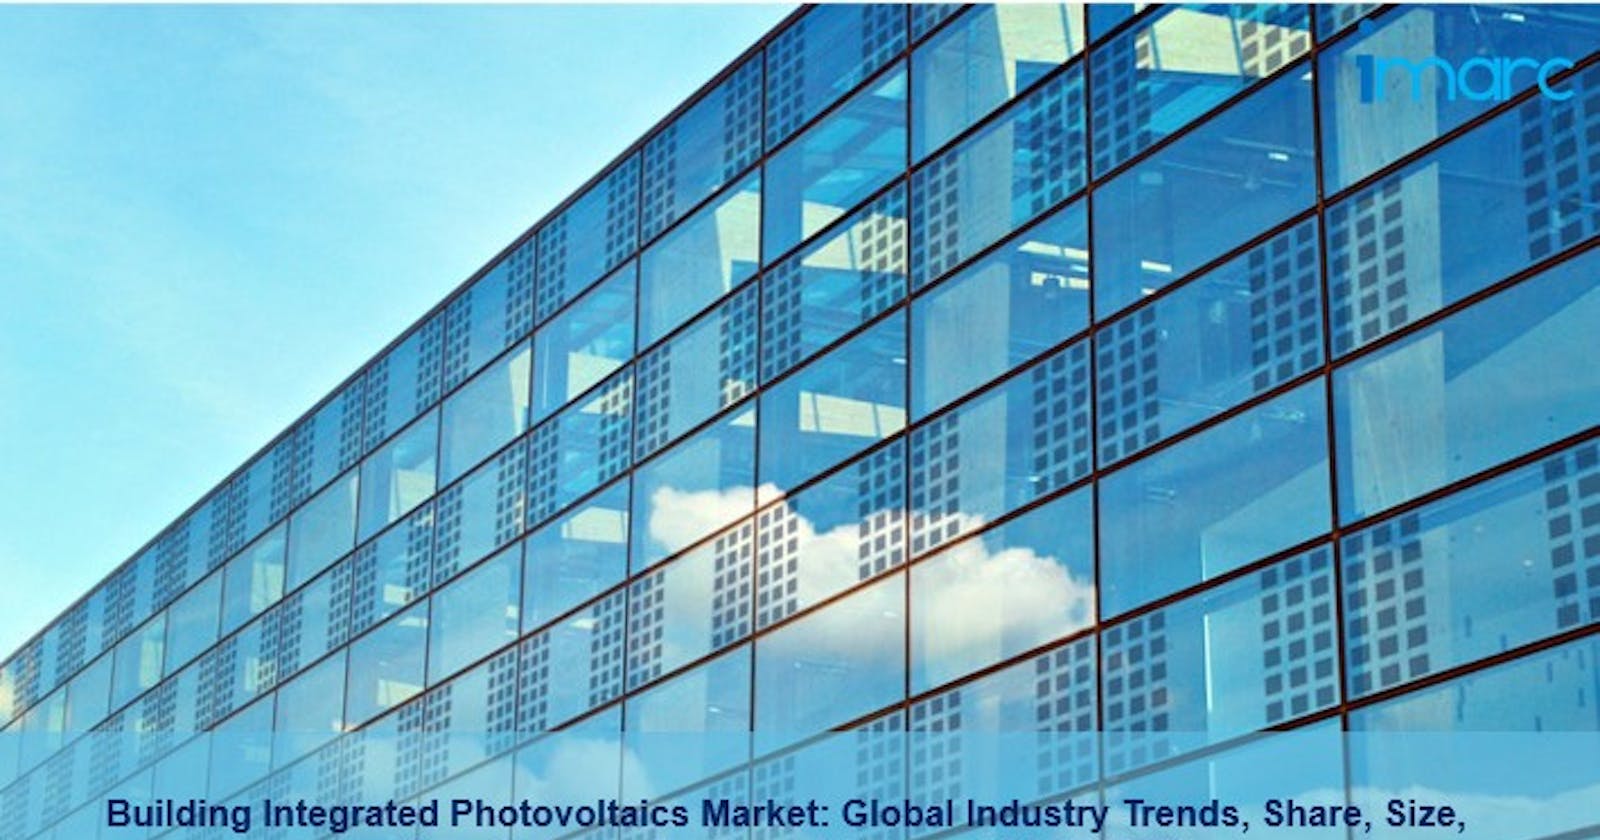 Building Integrated Photovoltaics Market Share, Size, Growth And Analysis 2022-2027